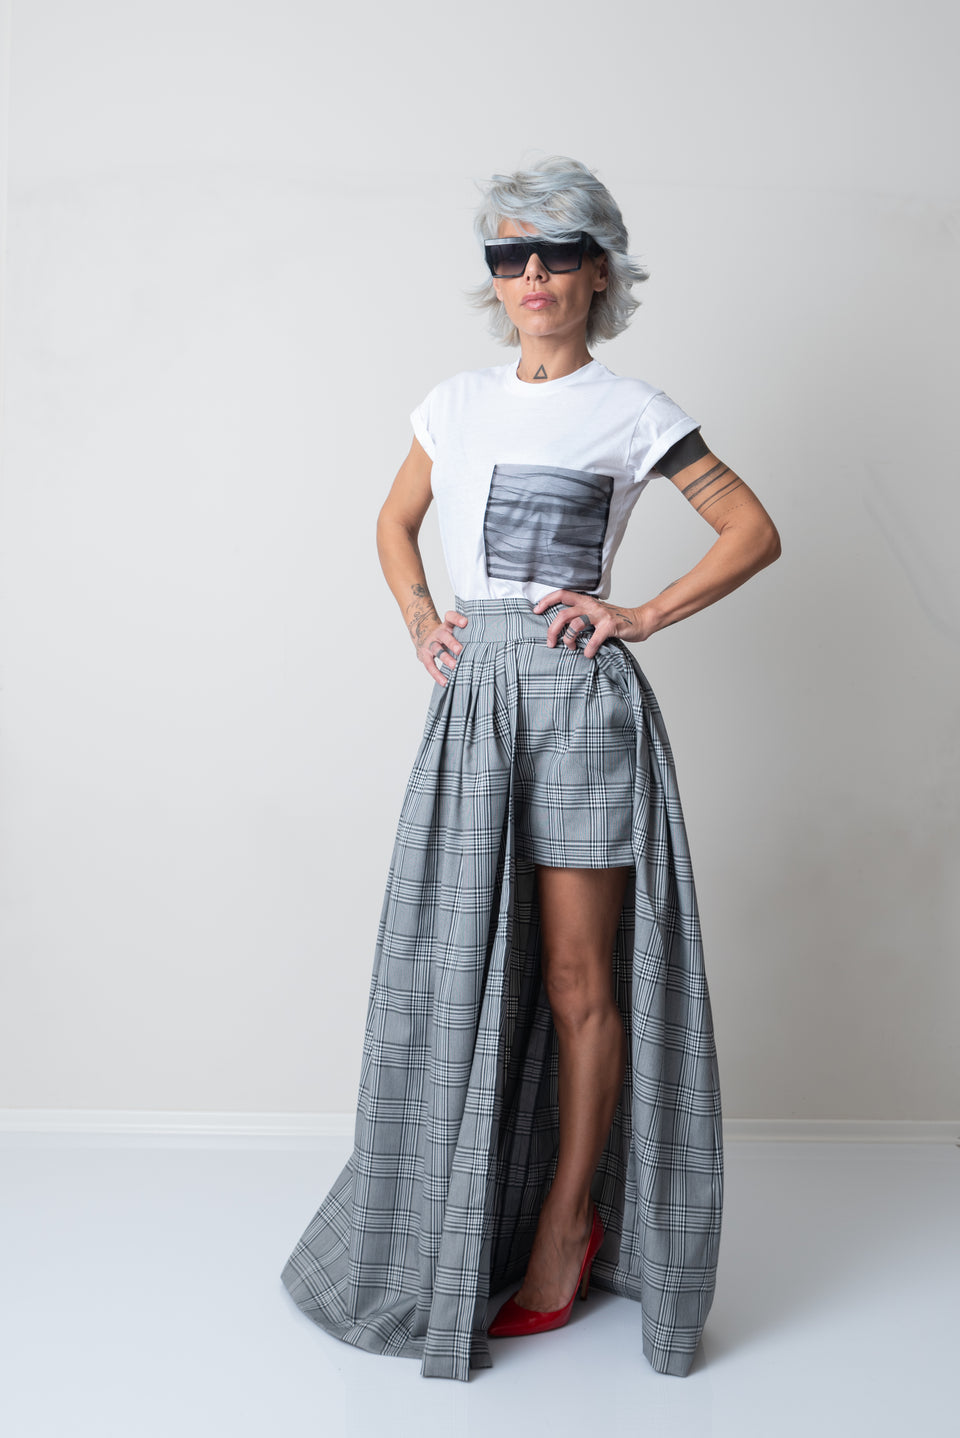 Turns Jeans into Skirts: How to Make DIY Skirts Out of Denim